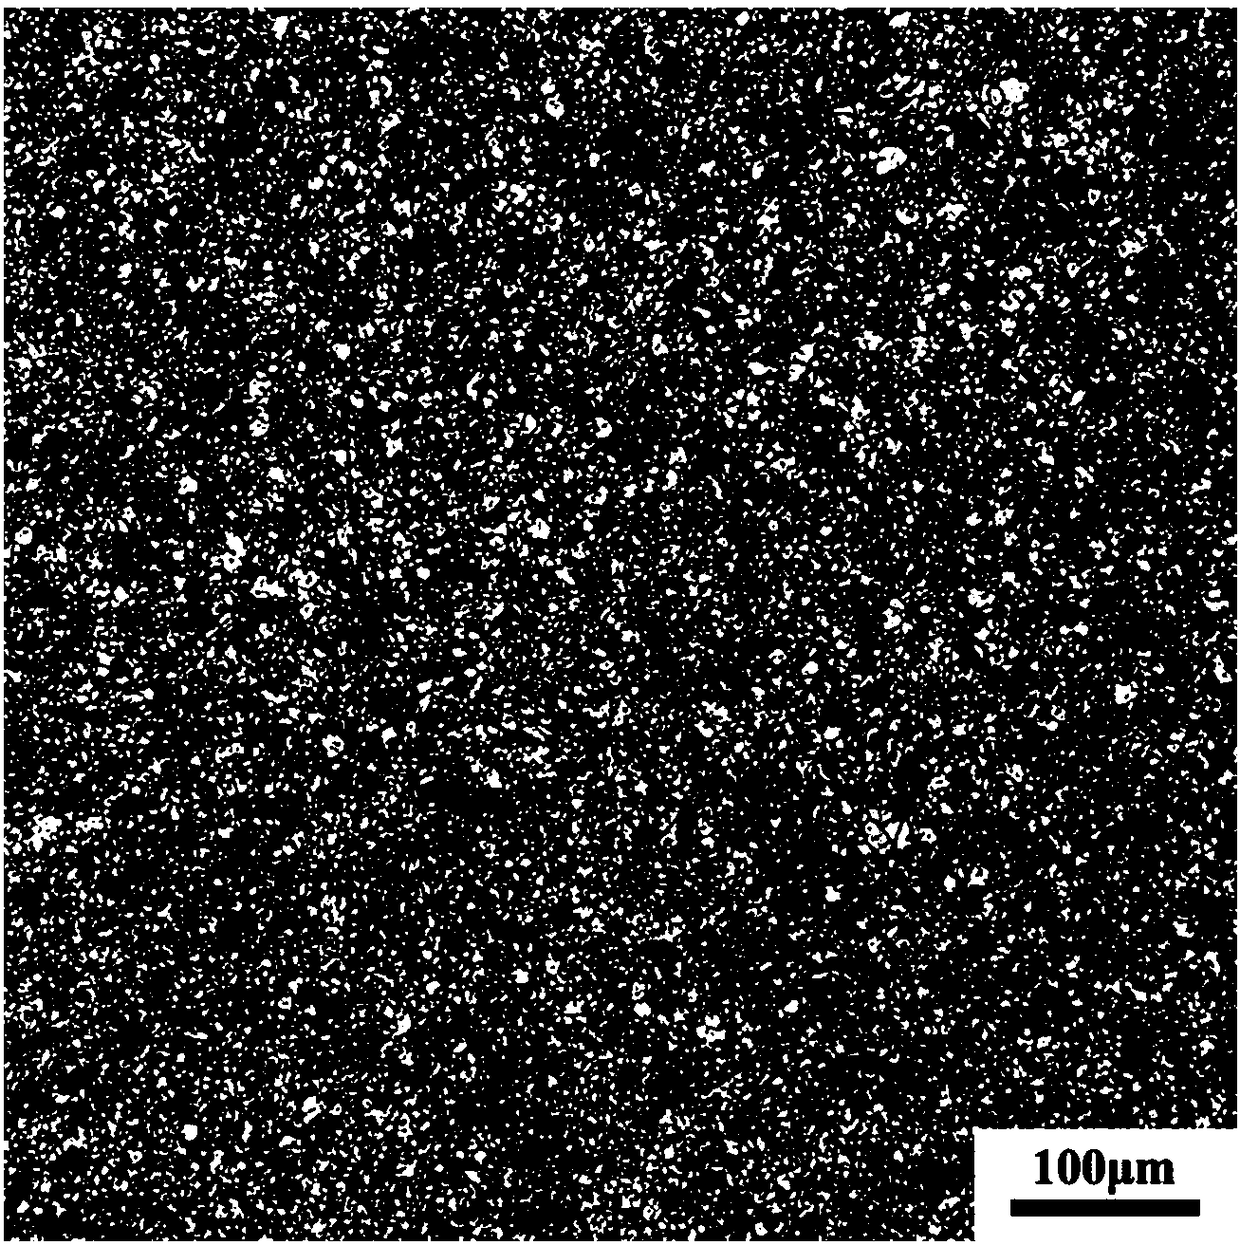 Multi-element composite enhanced magnesium alloy with high strength and low cost and preparation method thereof